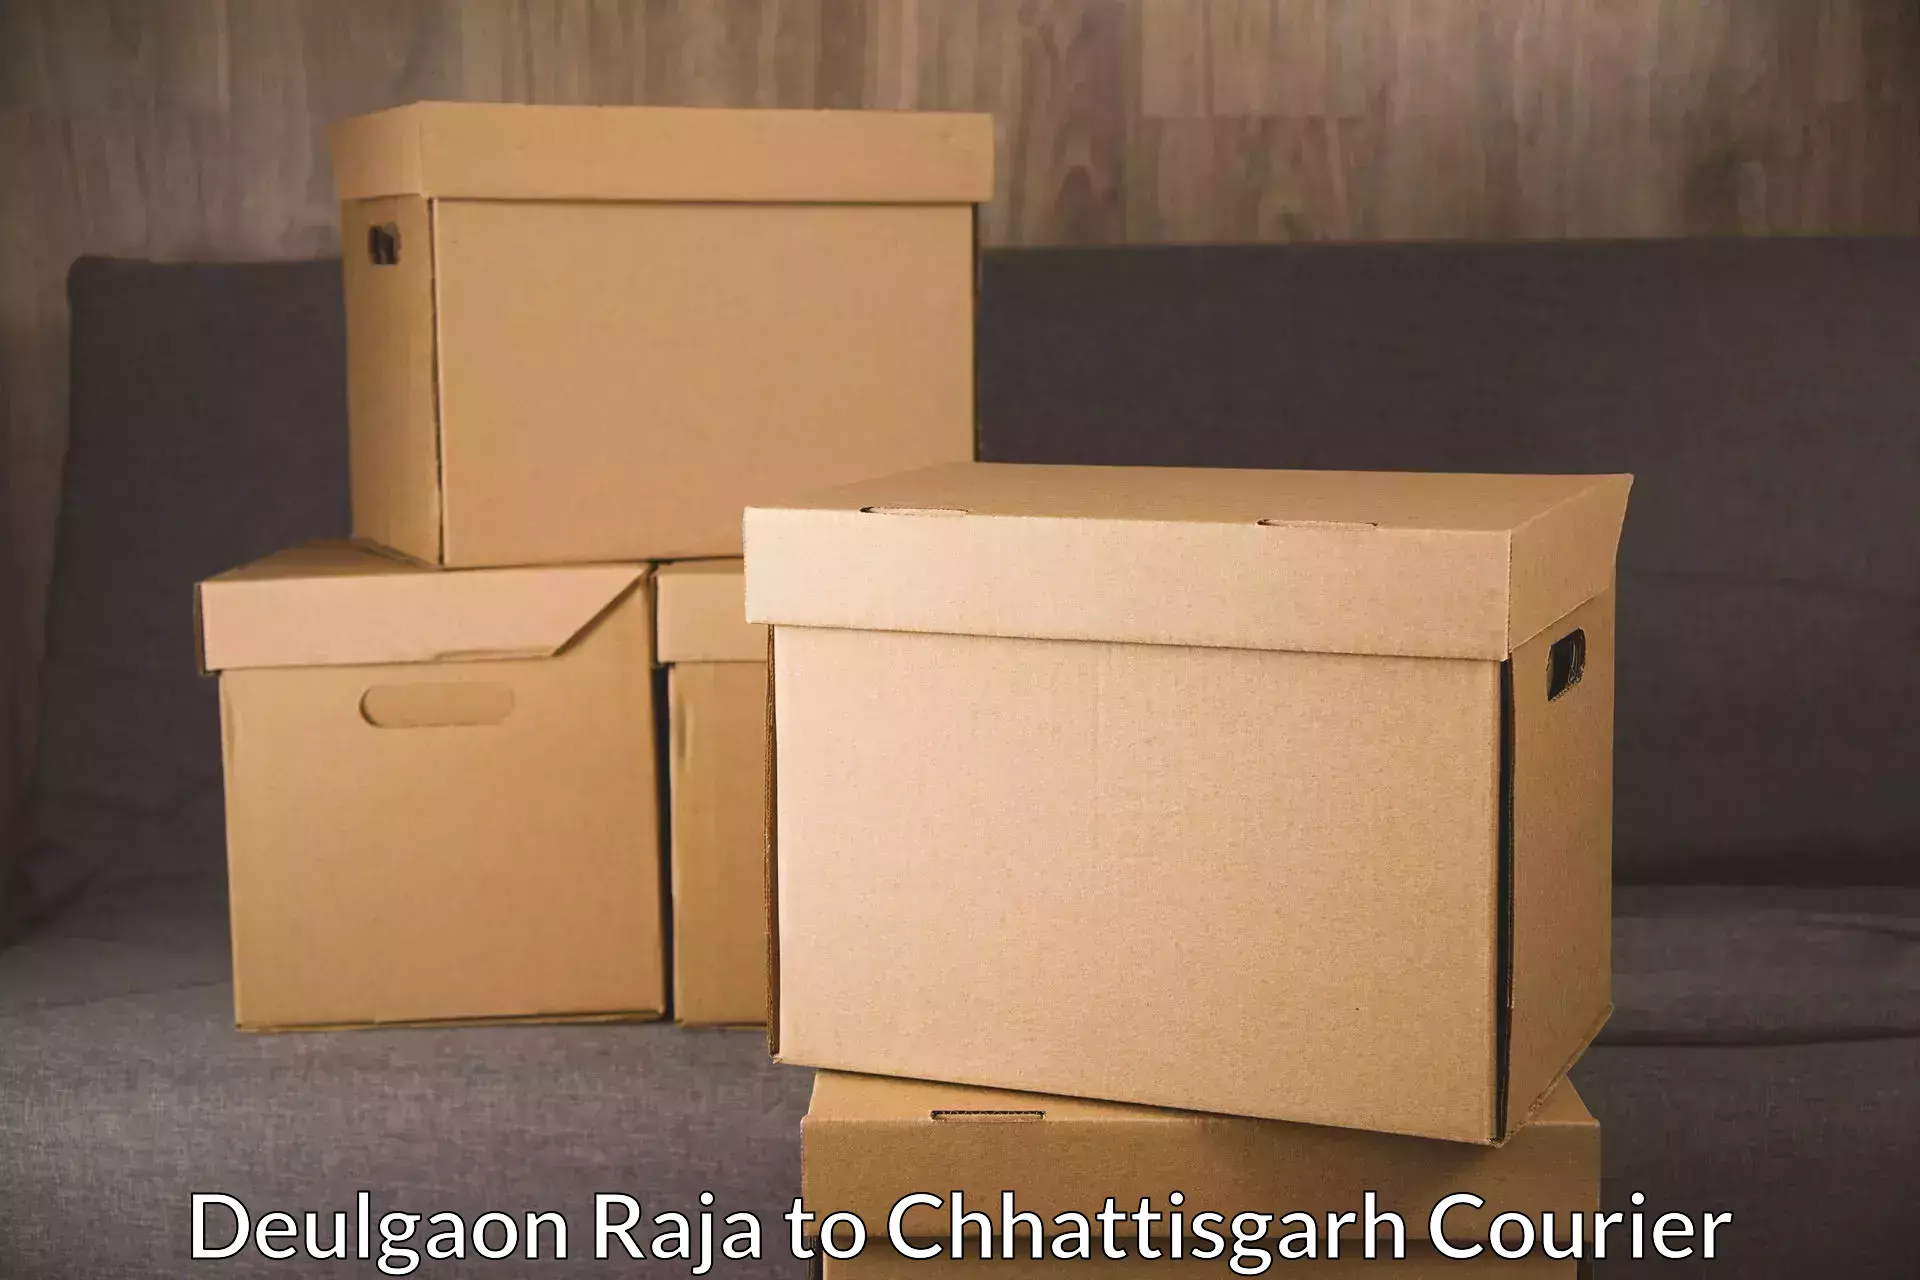 24-hour courier services Deulgaon Raja to Dhamtari